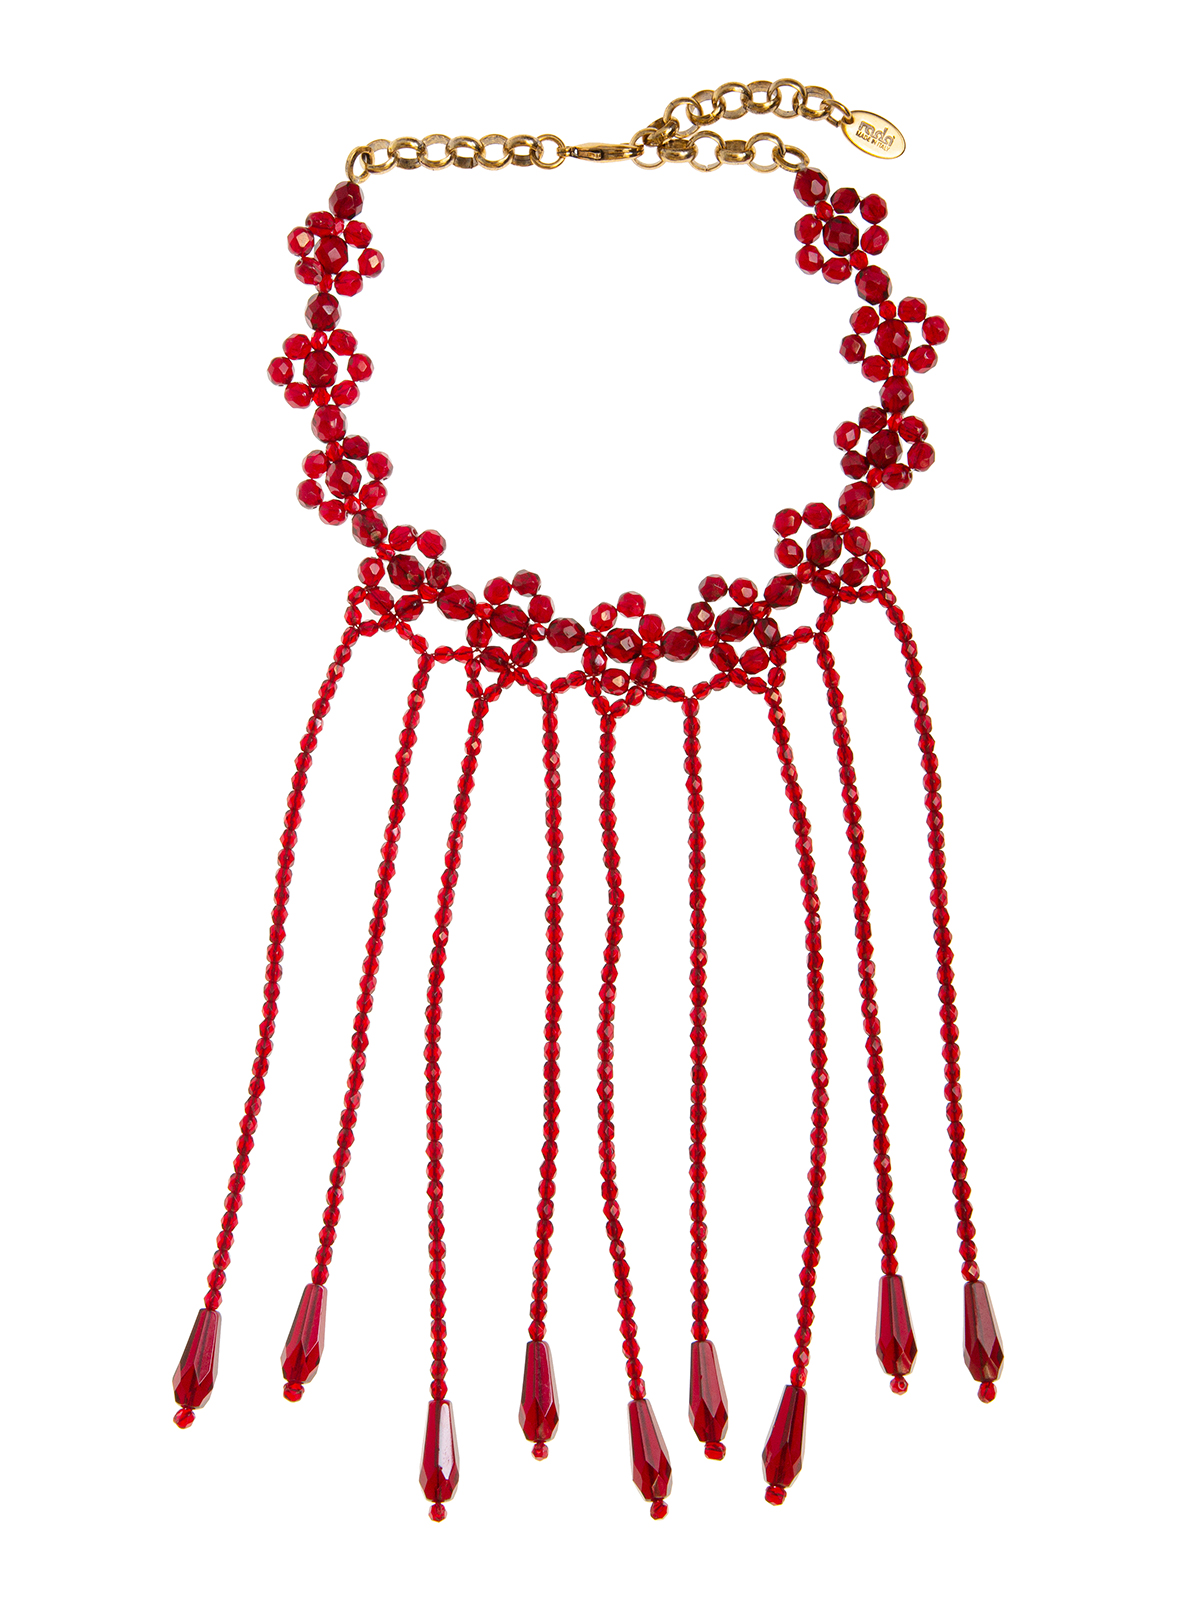 Beaded necklace embellished with bead fringe and drops